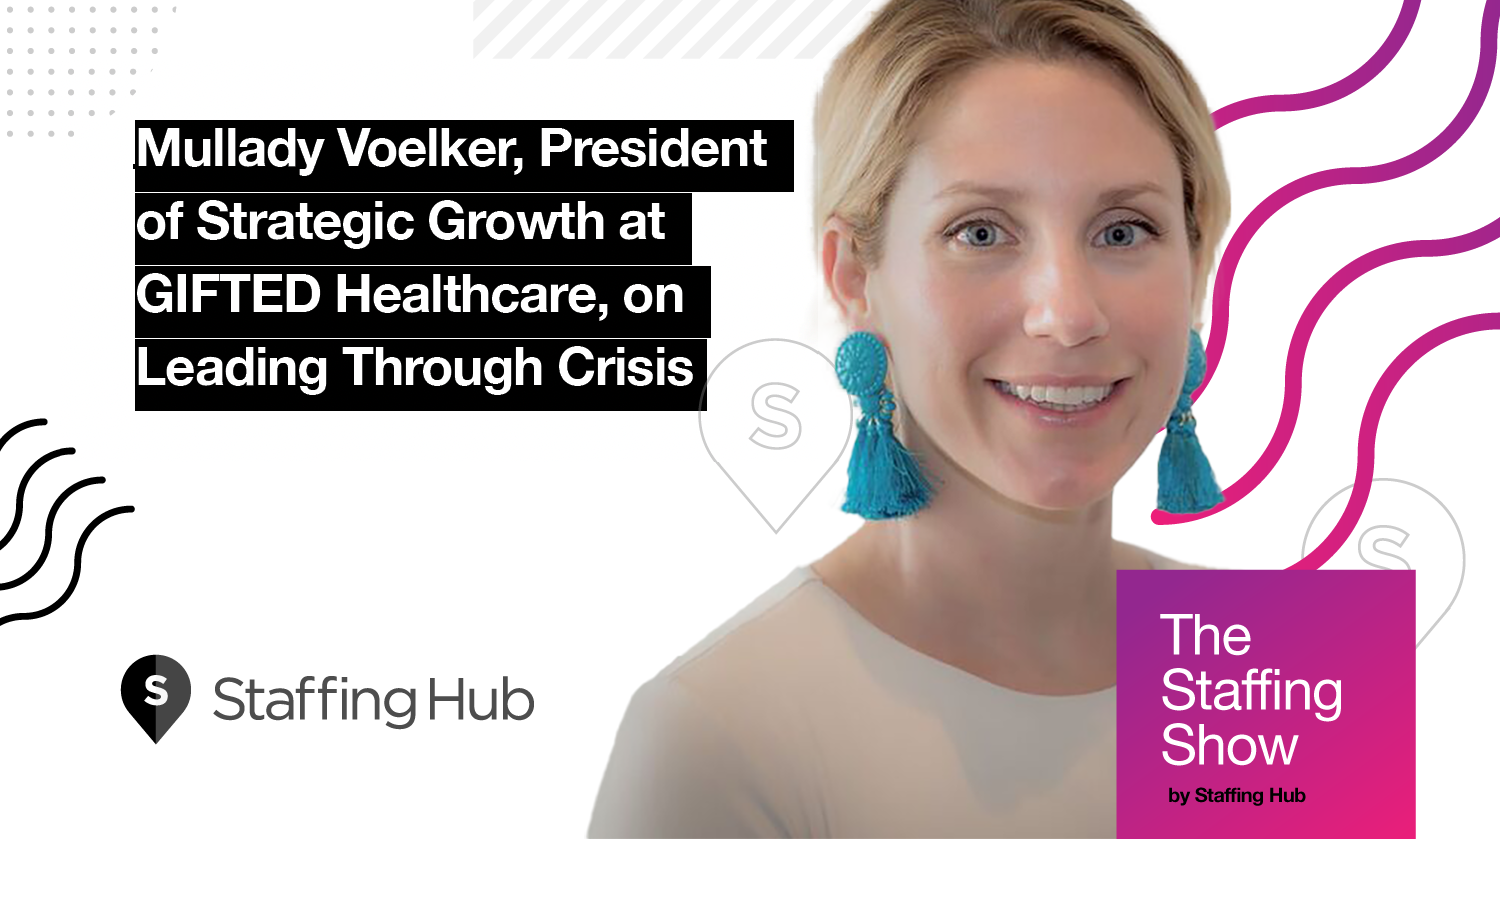 Mullady Voelker, President of Strategic Growth at GIFTED Healthcare, on Leading Through Crisis